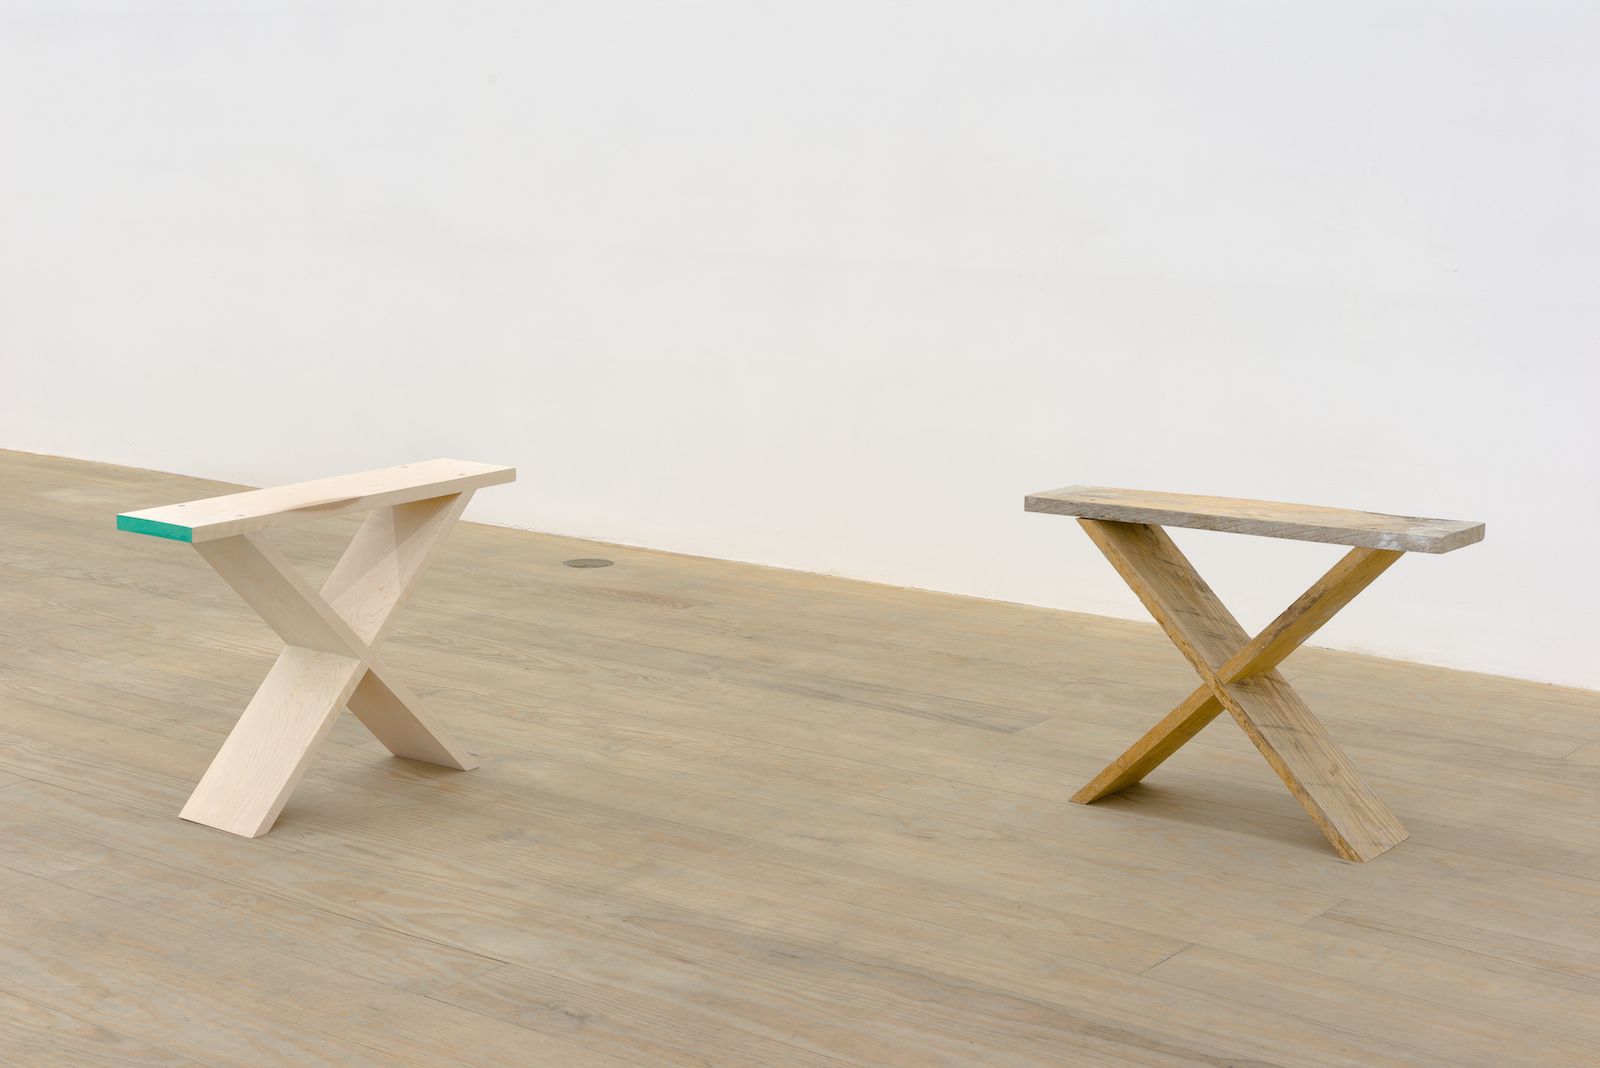 Gordon Hall, Double (I), 2014, found stool (Madison, ME) and replica, maple, dyed wood filler, 16 1⁄4 × 23 × 5 1⁄2 in.